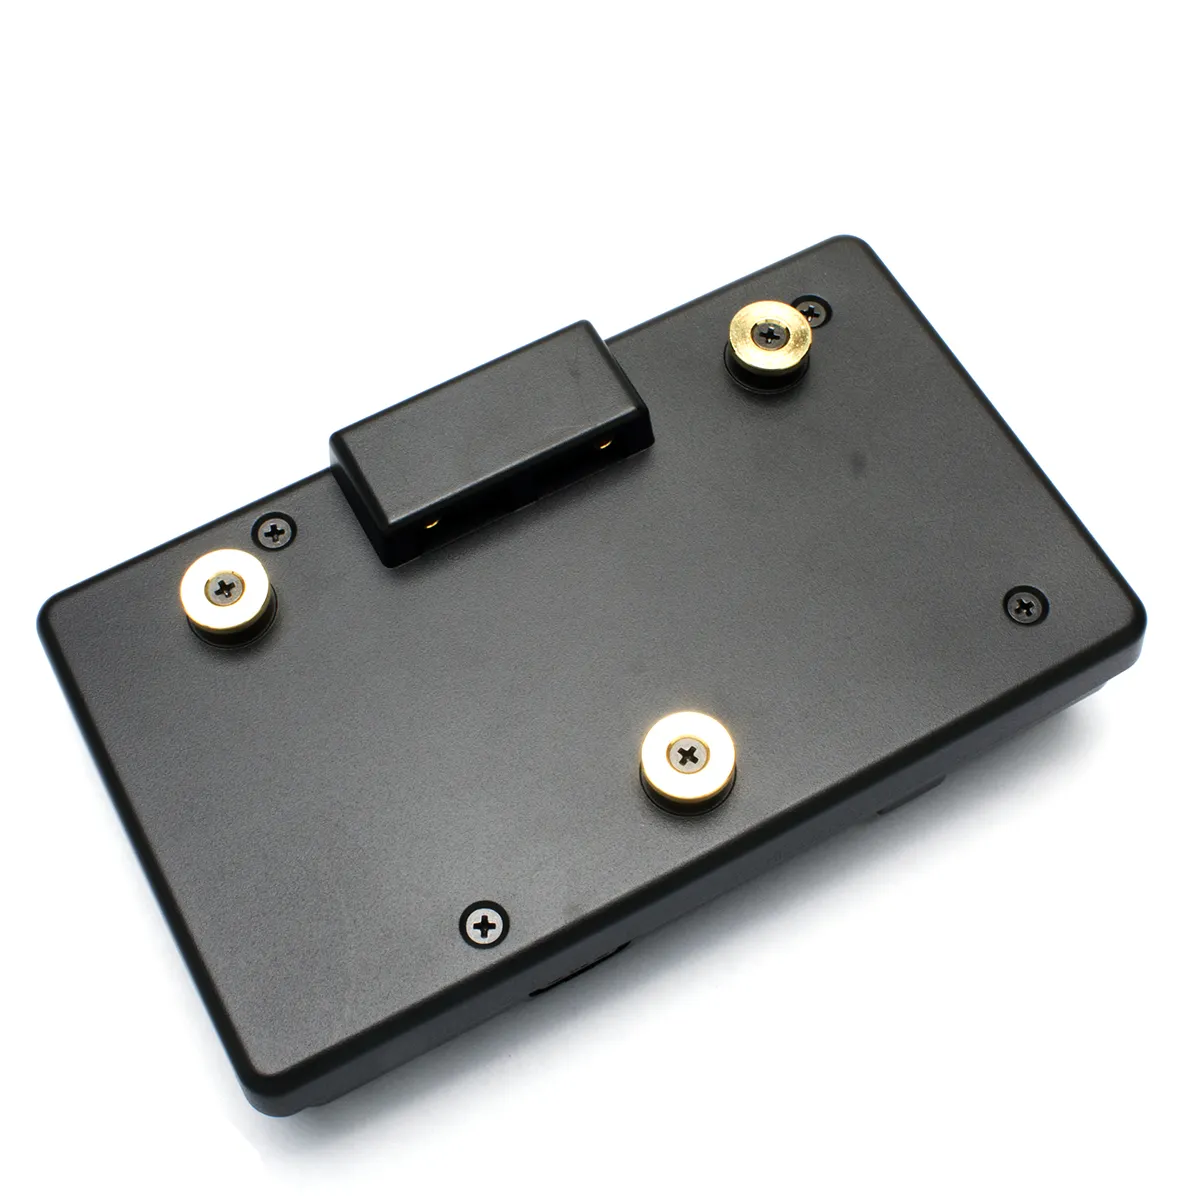 A-GP-S Converter Plate for Sony V-Lock V-Mount Battery to Anton Bauer Gold Mount Adapter Plate Panasonic DSLR Camera